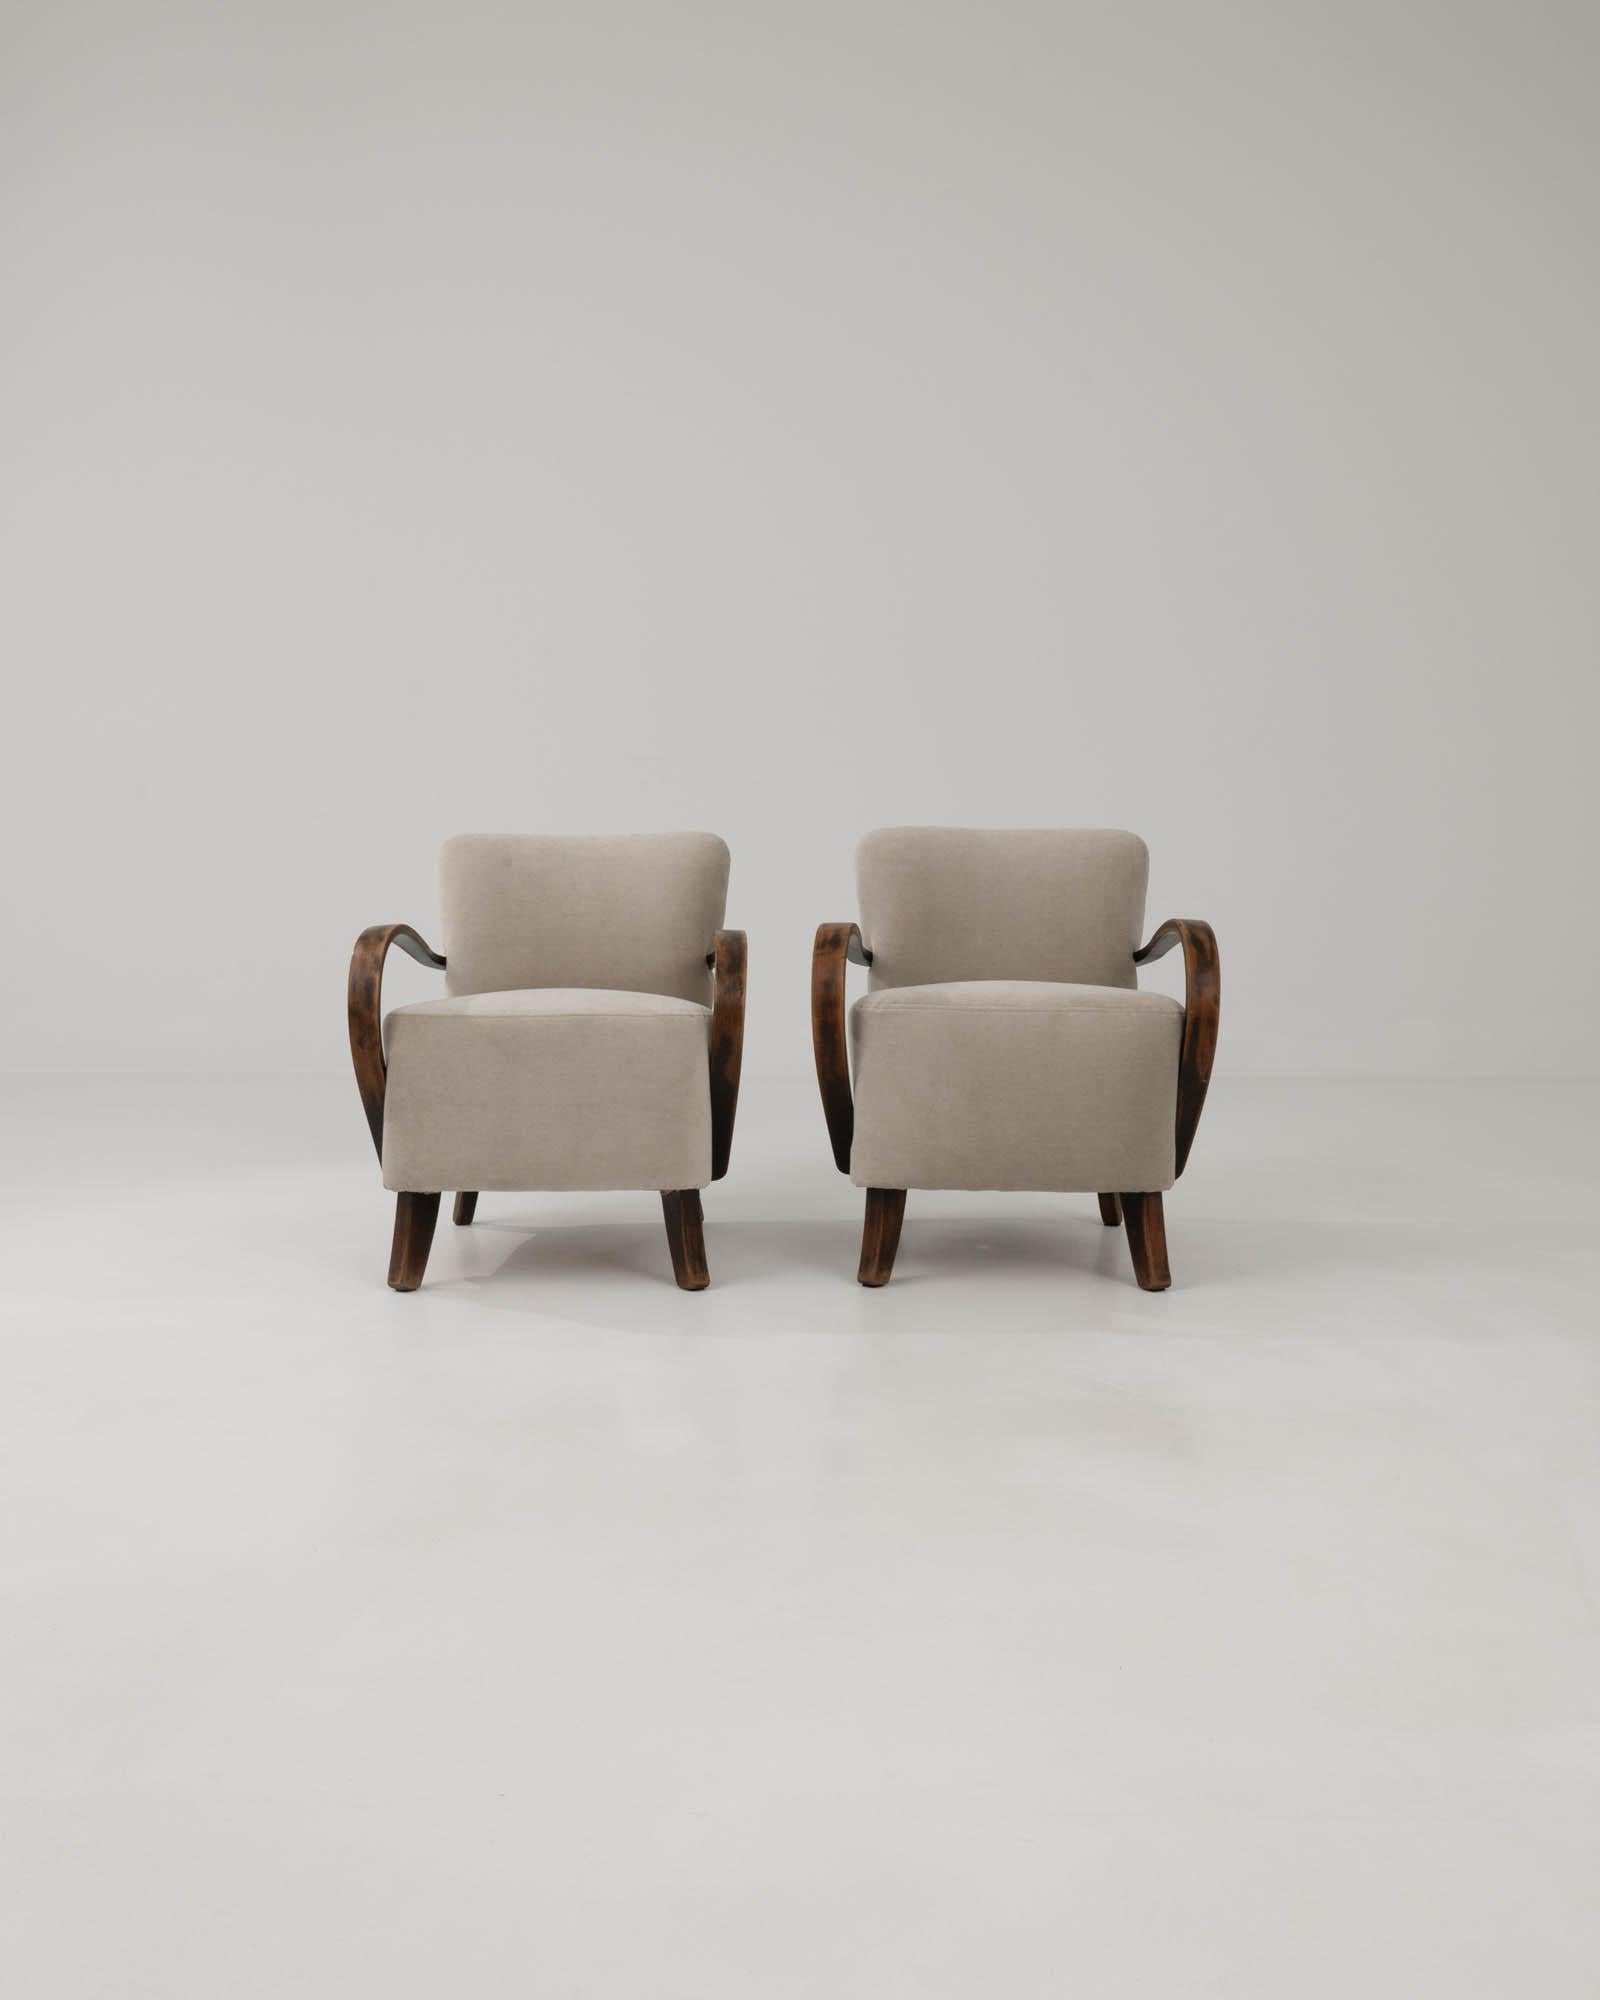 Czech 1950s Pair Of Upholstered Armchairs By J. Halabala